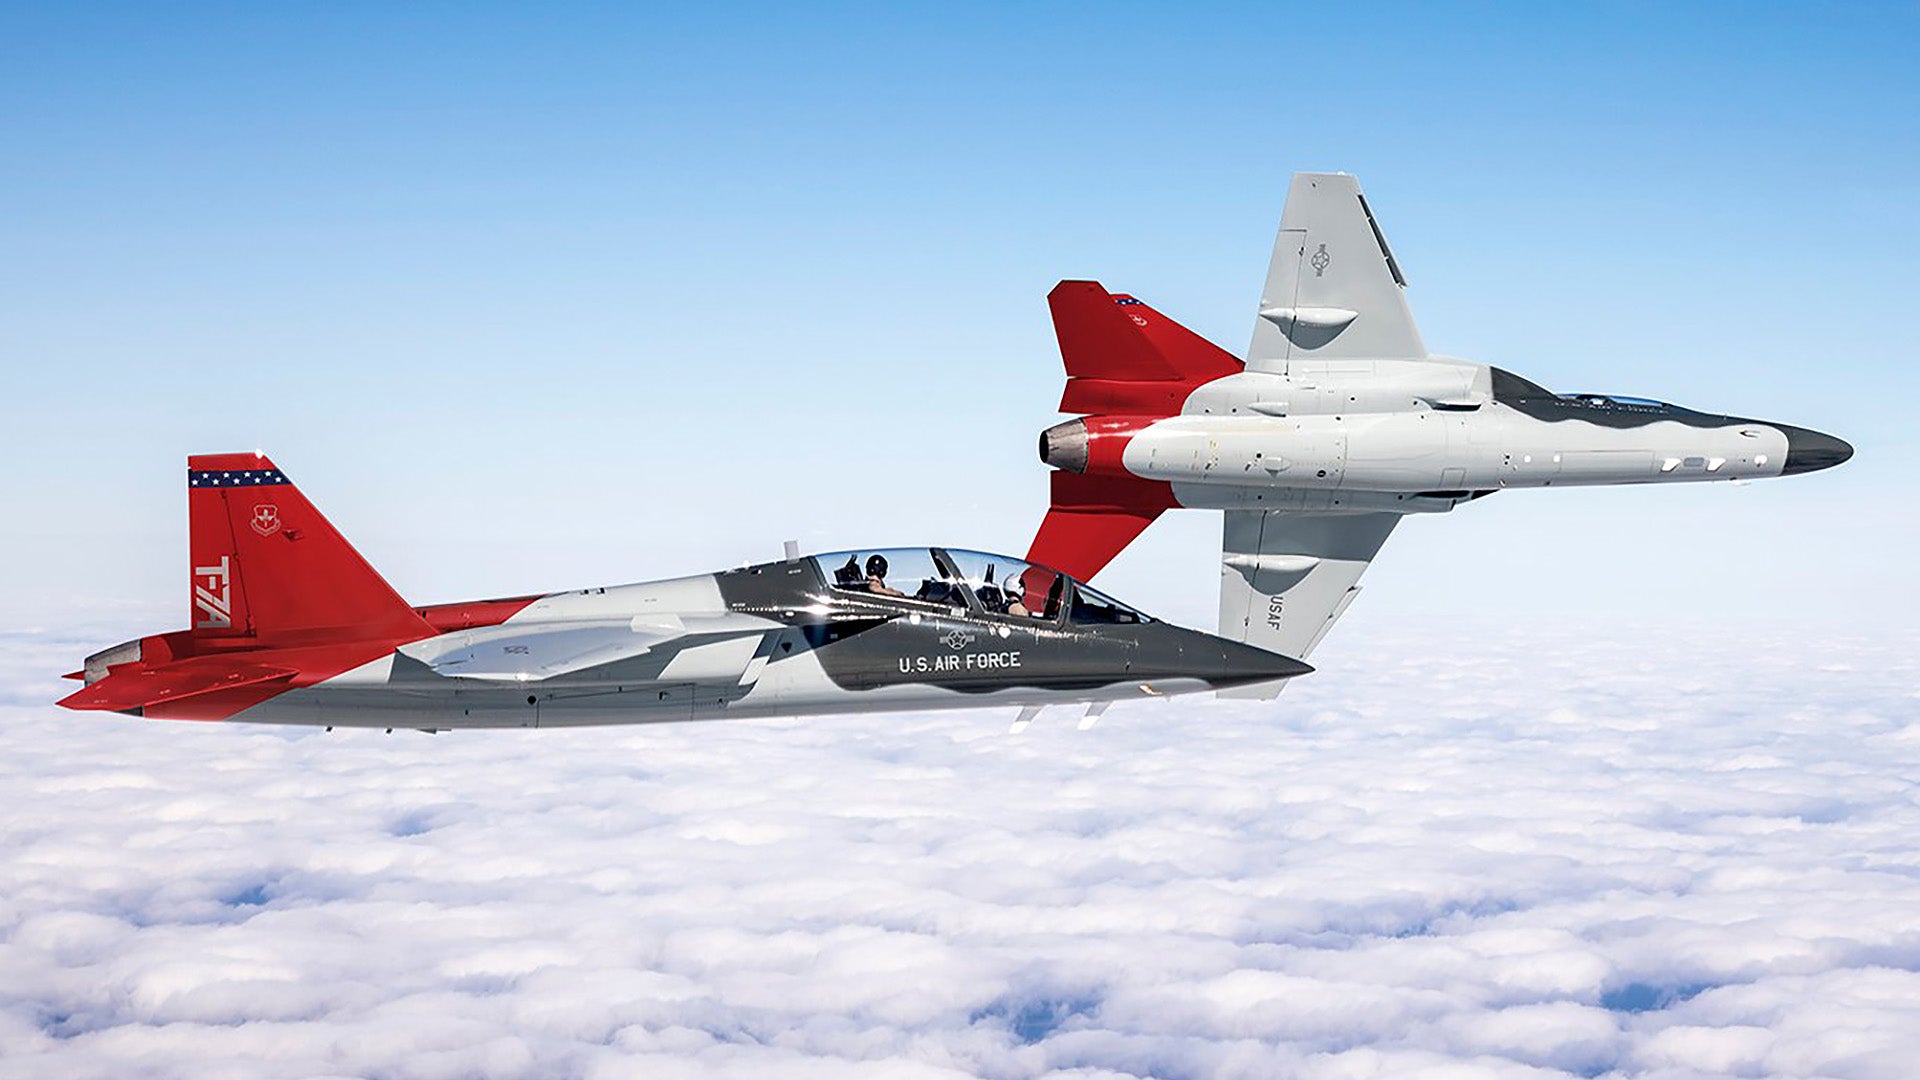 The Air Force's New T-X Jet Trainer Now Has An Official Name And Designation